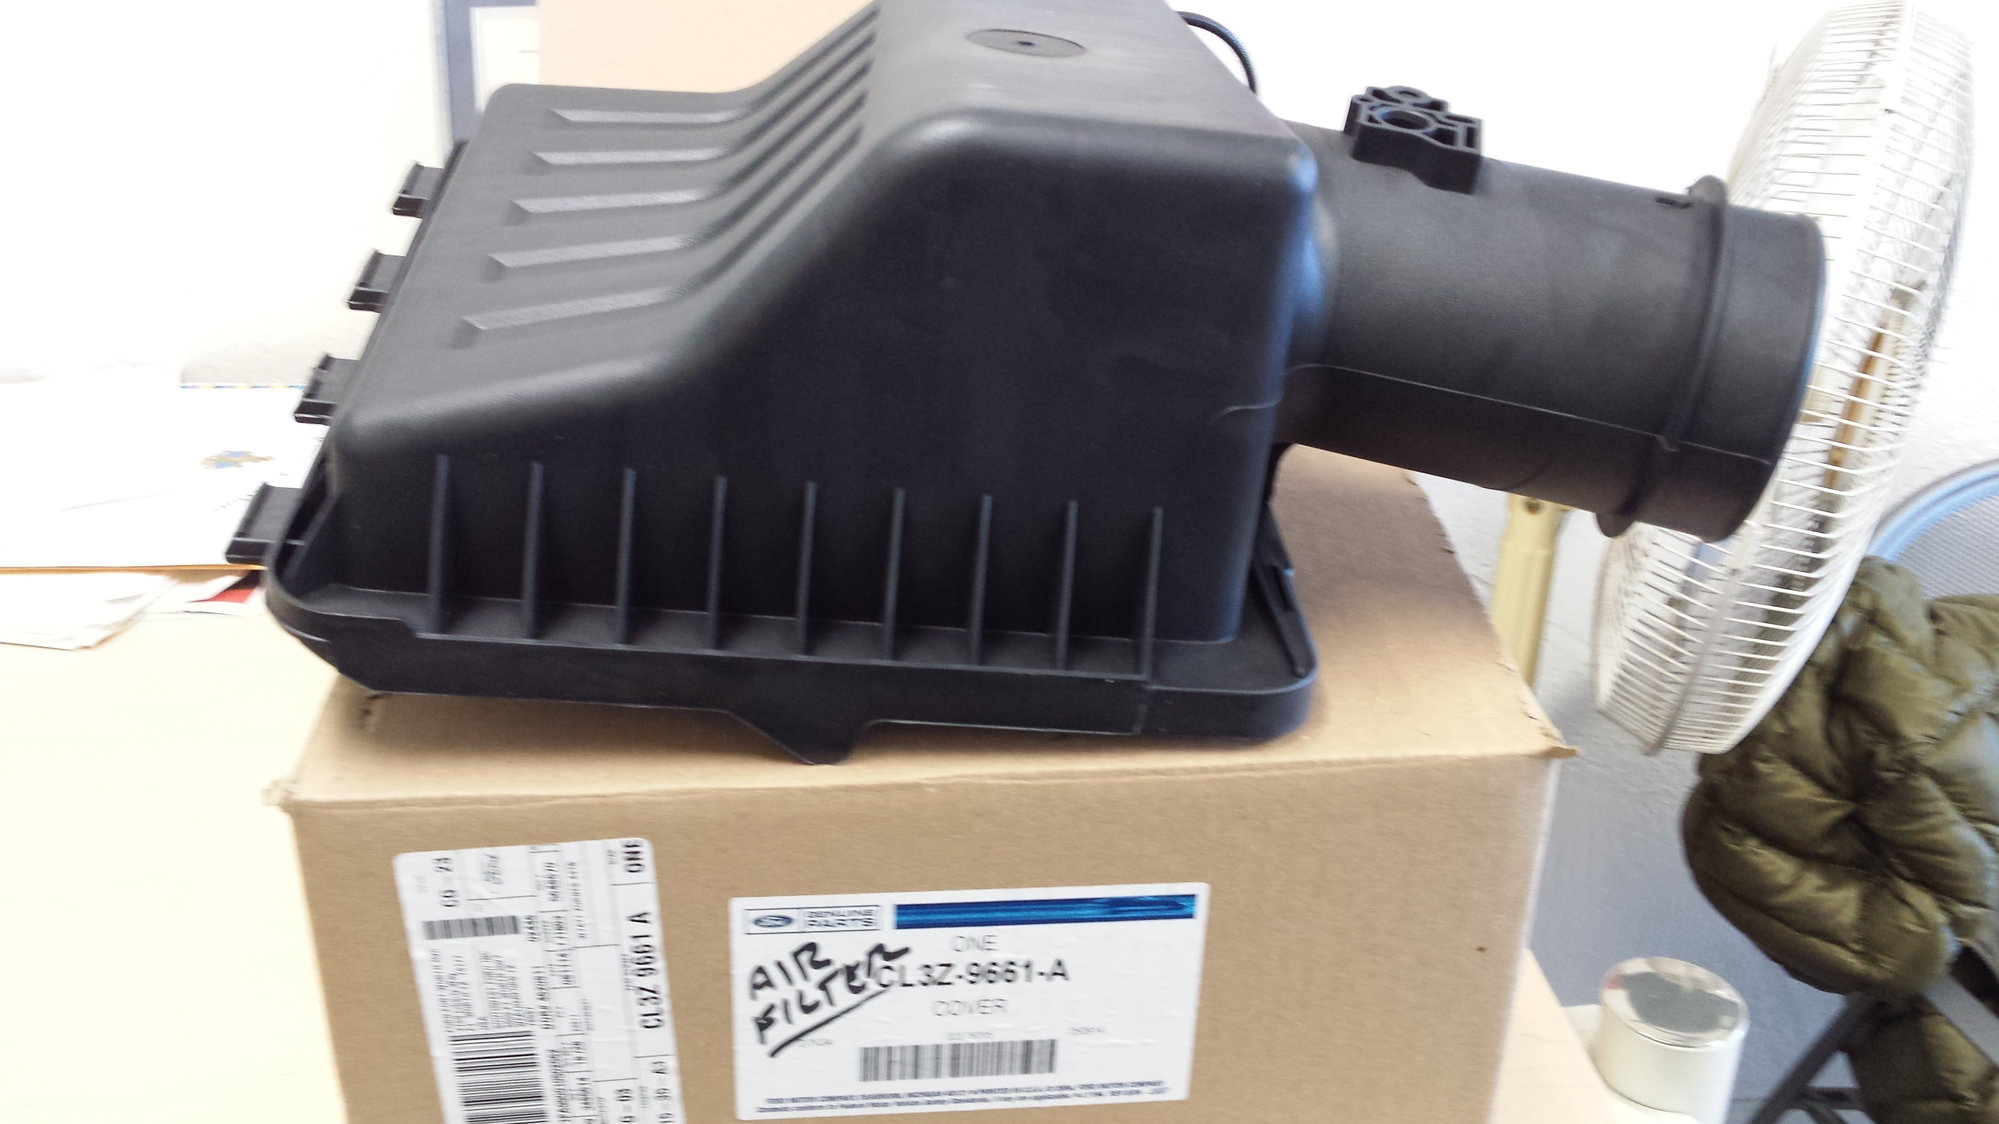 F150 2012-2014 Ecoboost Air Filter Box Cover - Ford Truck Enthusiasts Forums 2012 Ford F150 3.5 Ecoboost Oil Filter